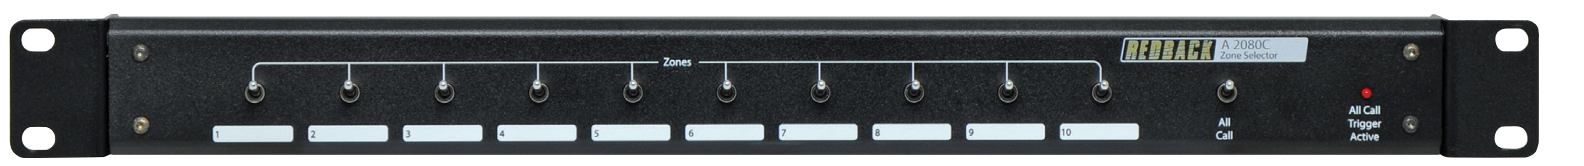 REDBACK 10 ZONE & ALL CALL 100V LINE PA SPEAKER SELECTION PANEL RACK MOUNTED BLACK 50W PER ZONE TOTAL 500W NO POWER REQUIRED SCREW TERMINALS